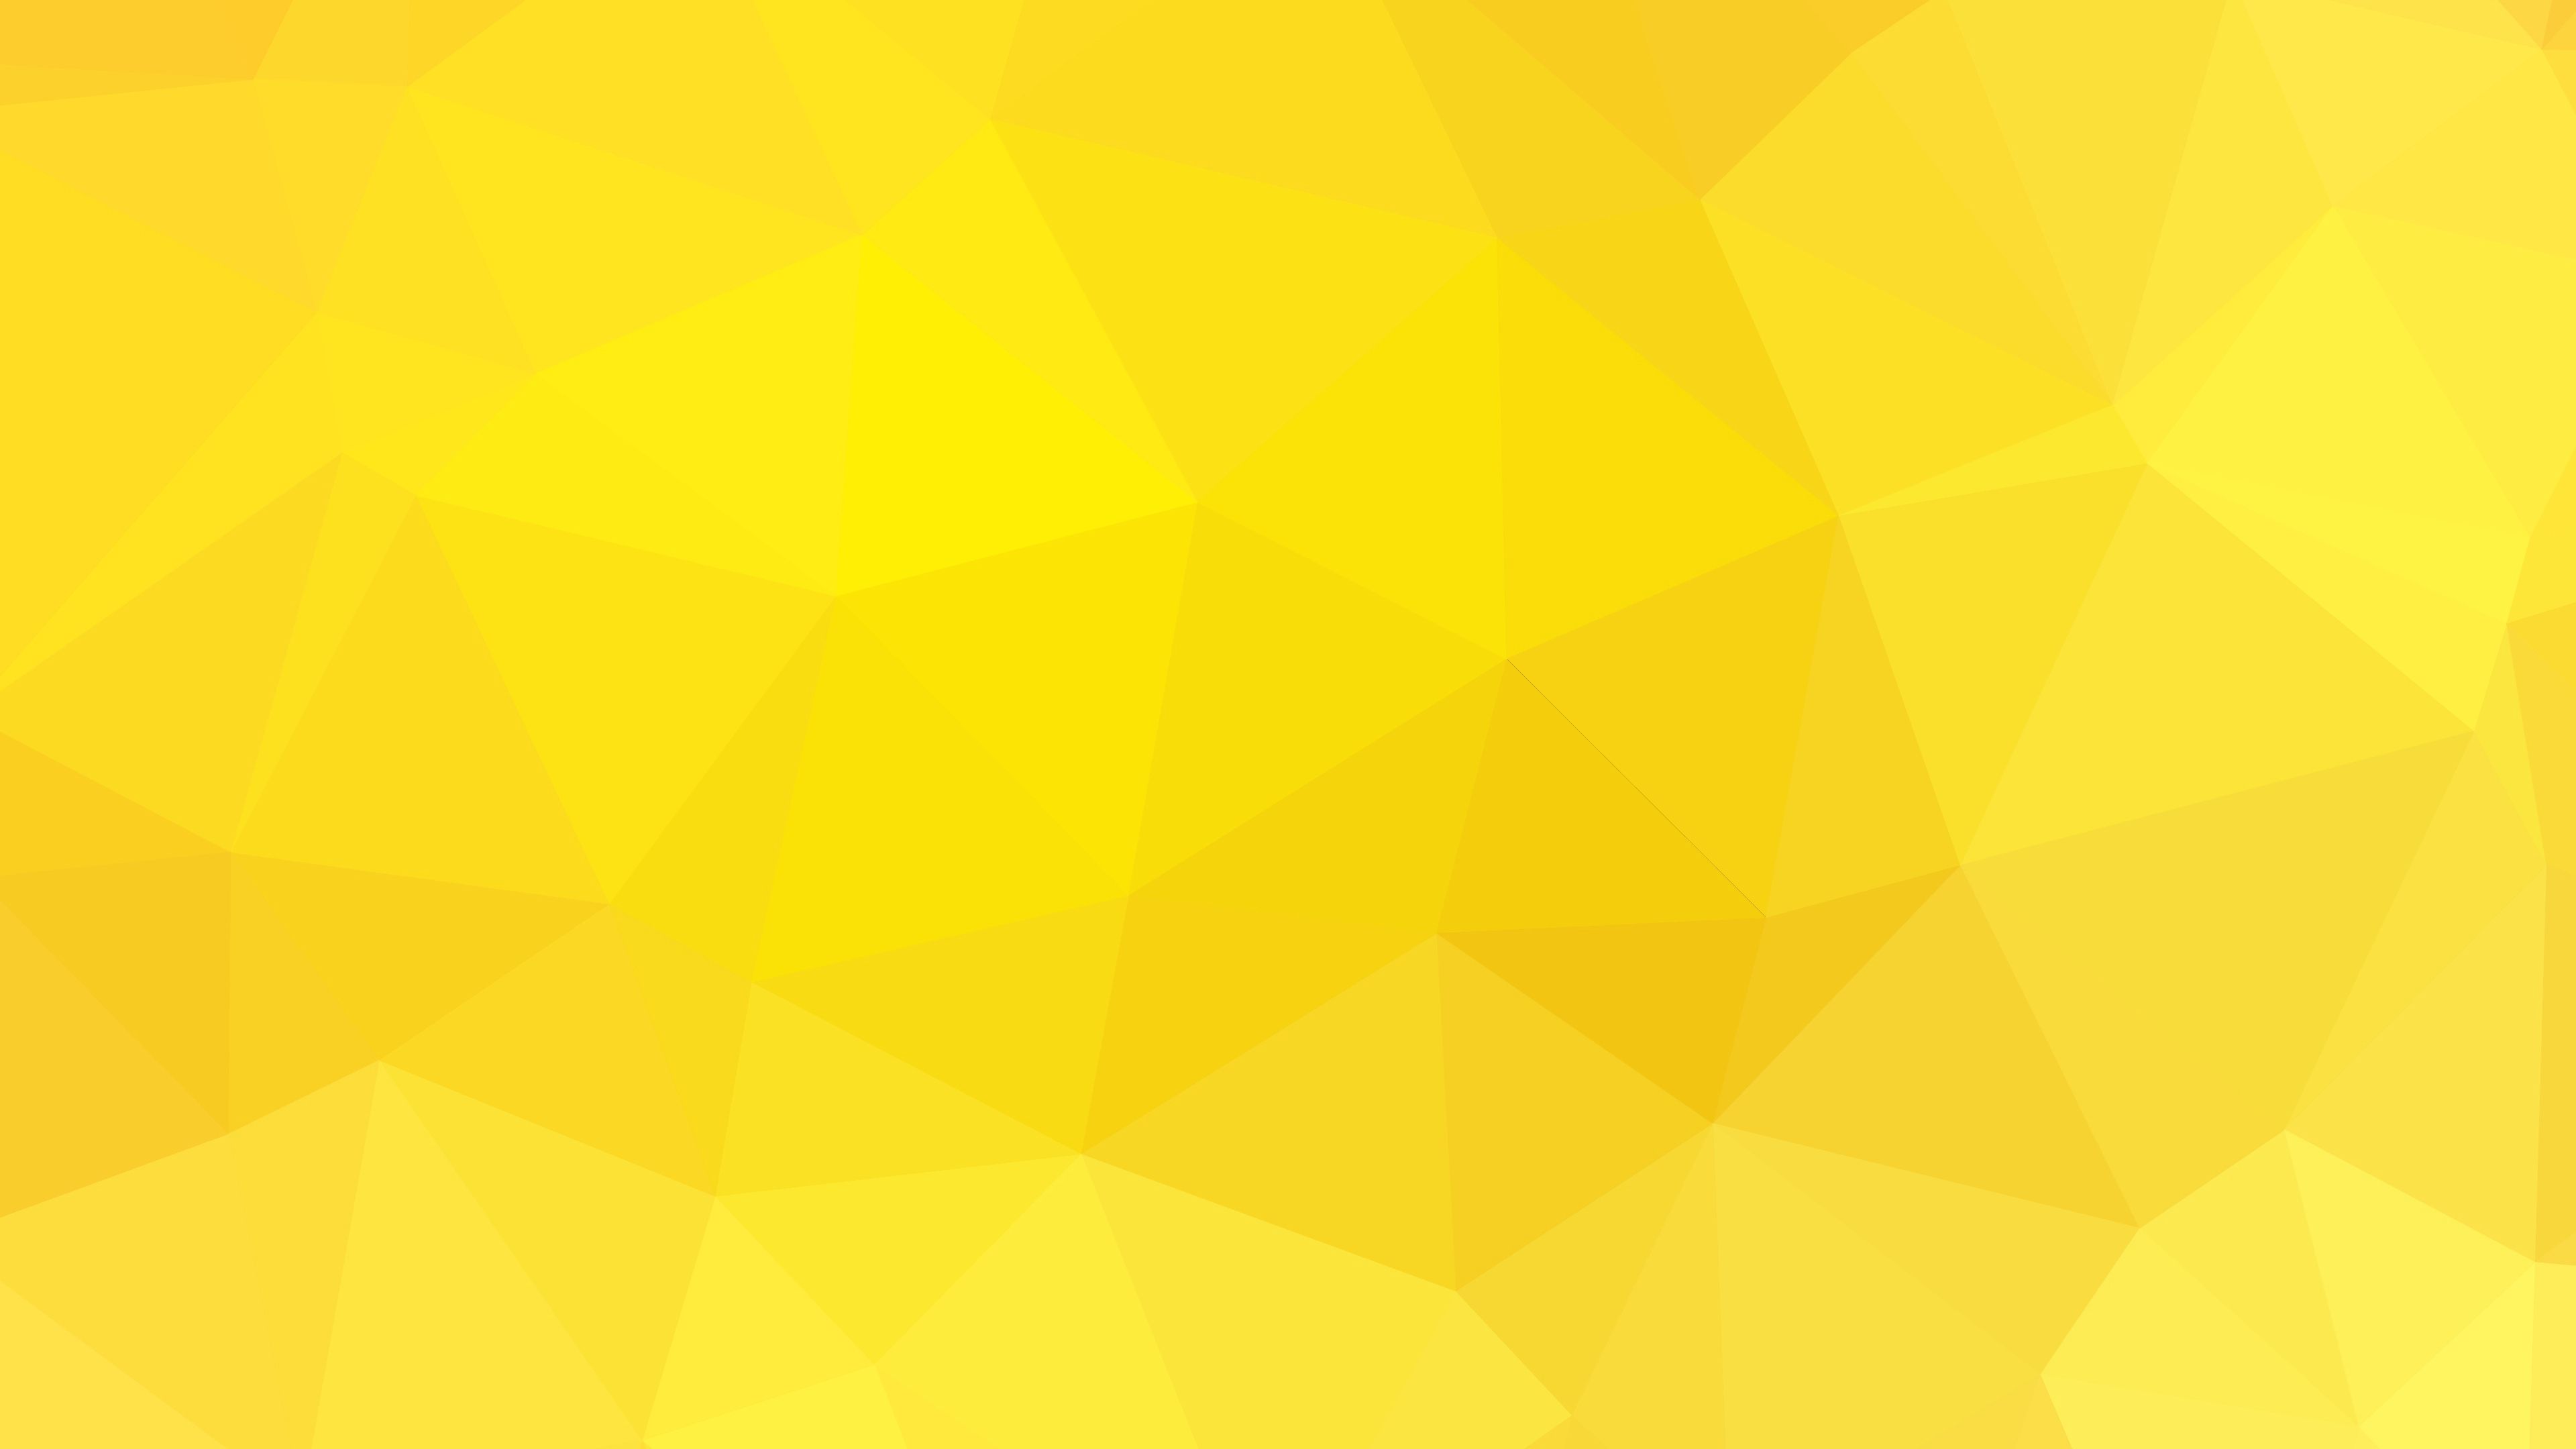 polygon, background, yellow, texture, textures, geometric, shades, triangles, polygonal